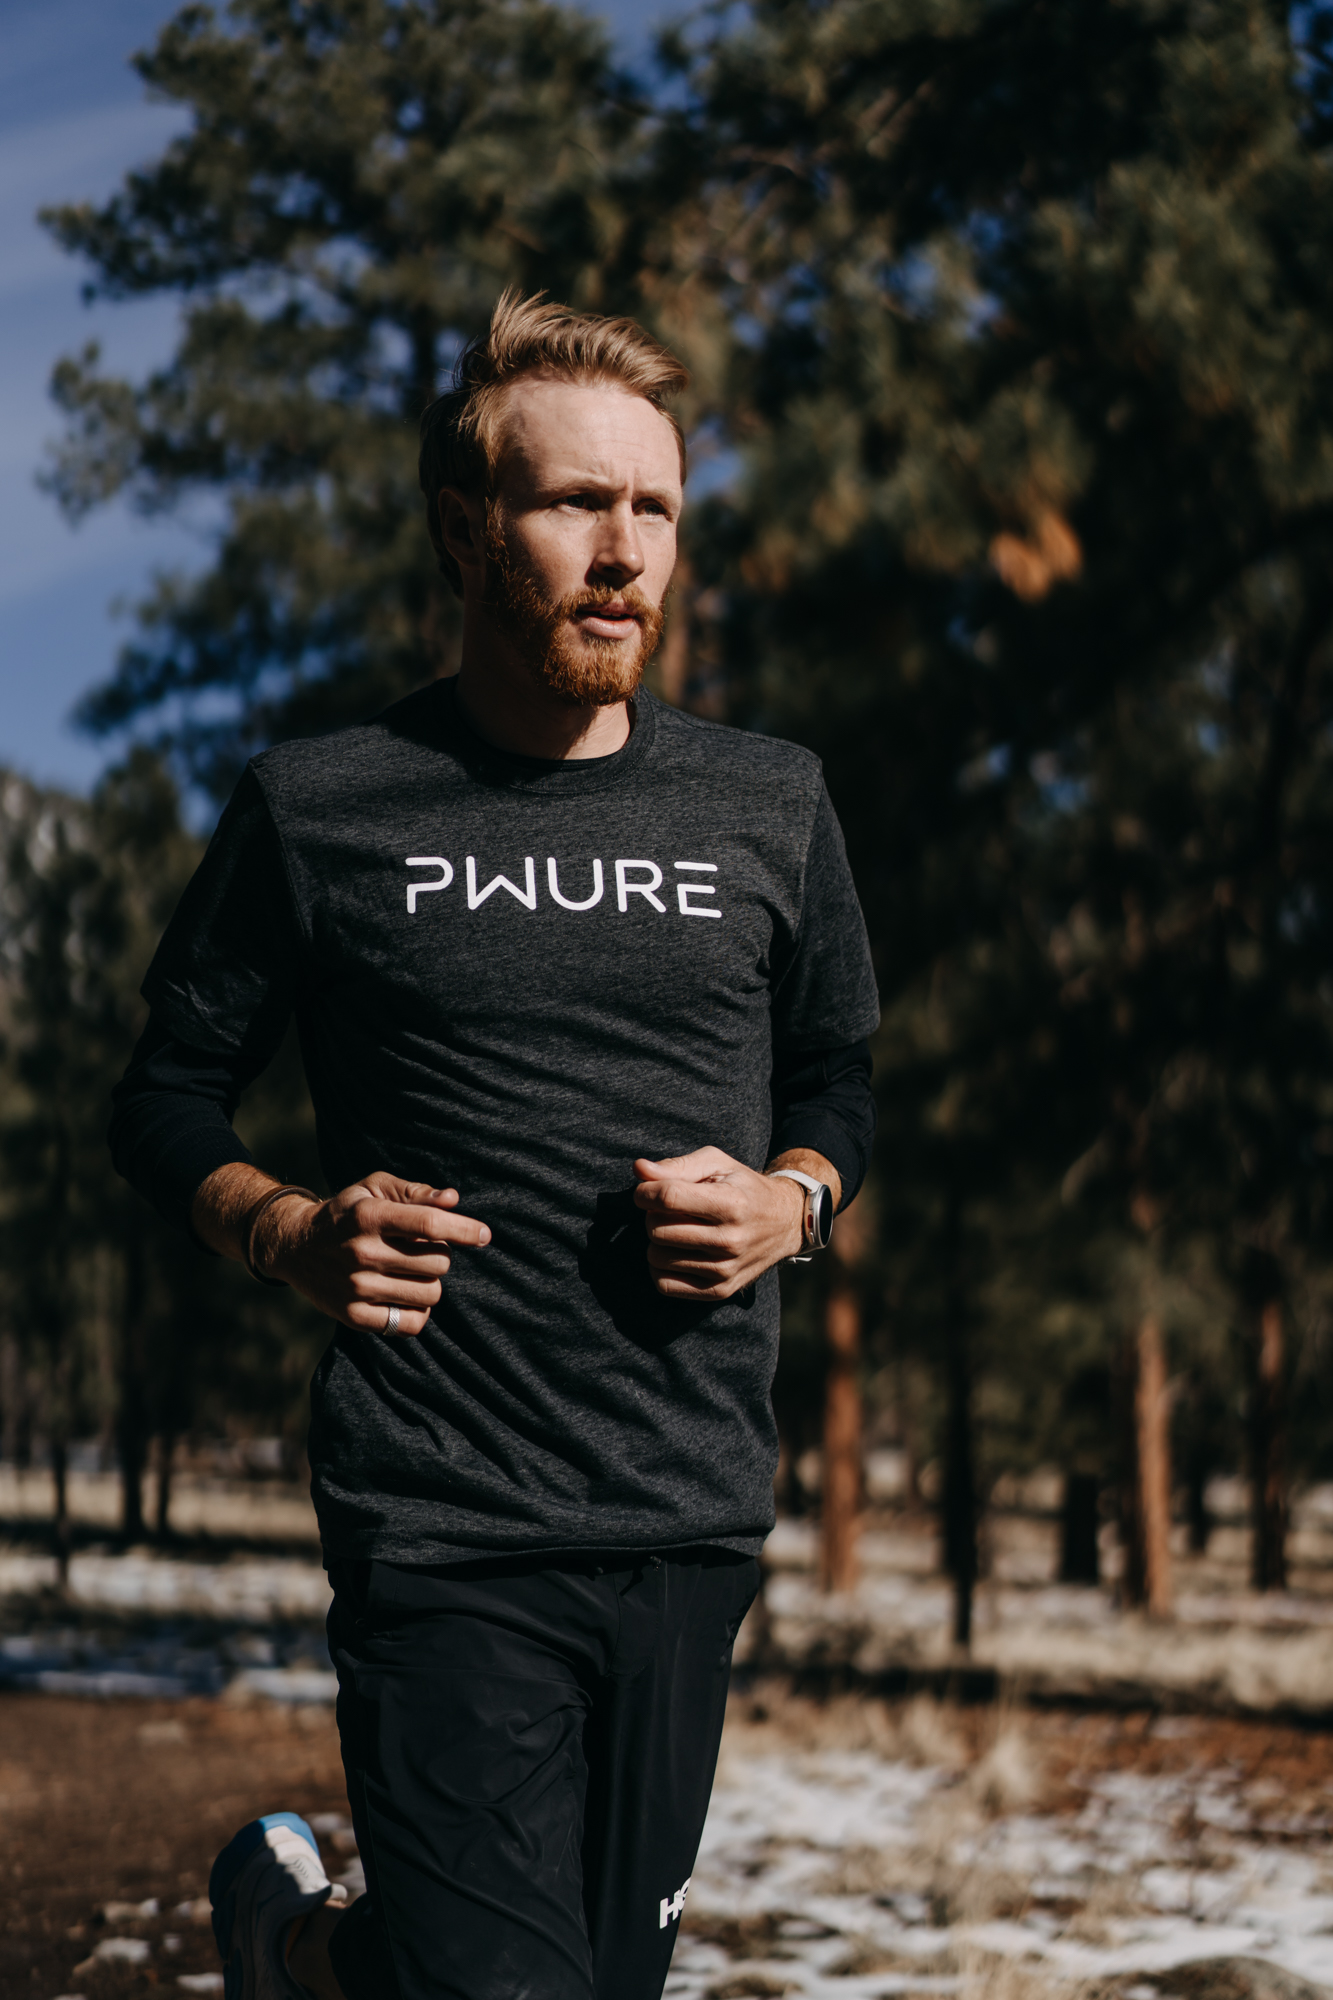 Pwure, the personalized, data-based sports nutrition company, today welcomes top long distance runner, Scott Fauble, as its newest investor and athlete brand ambassador.